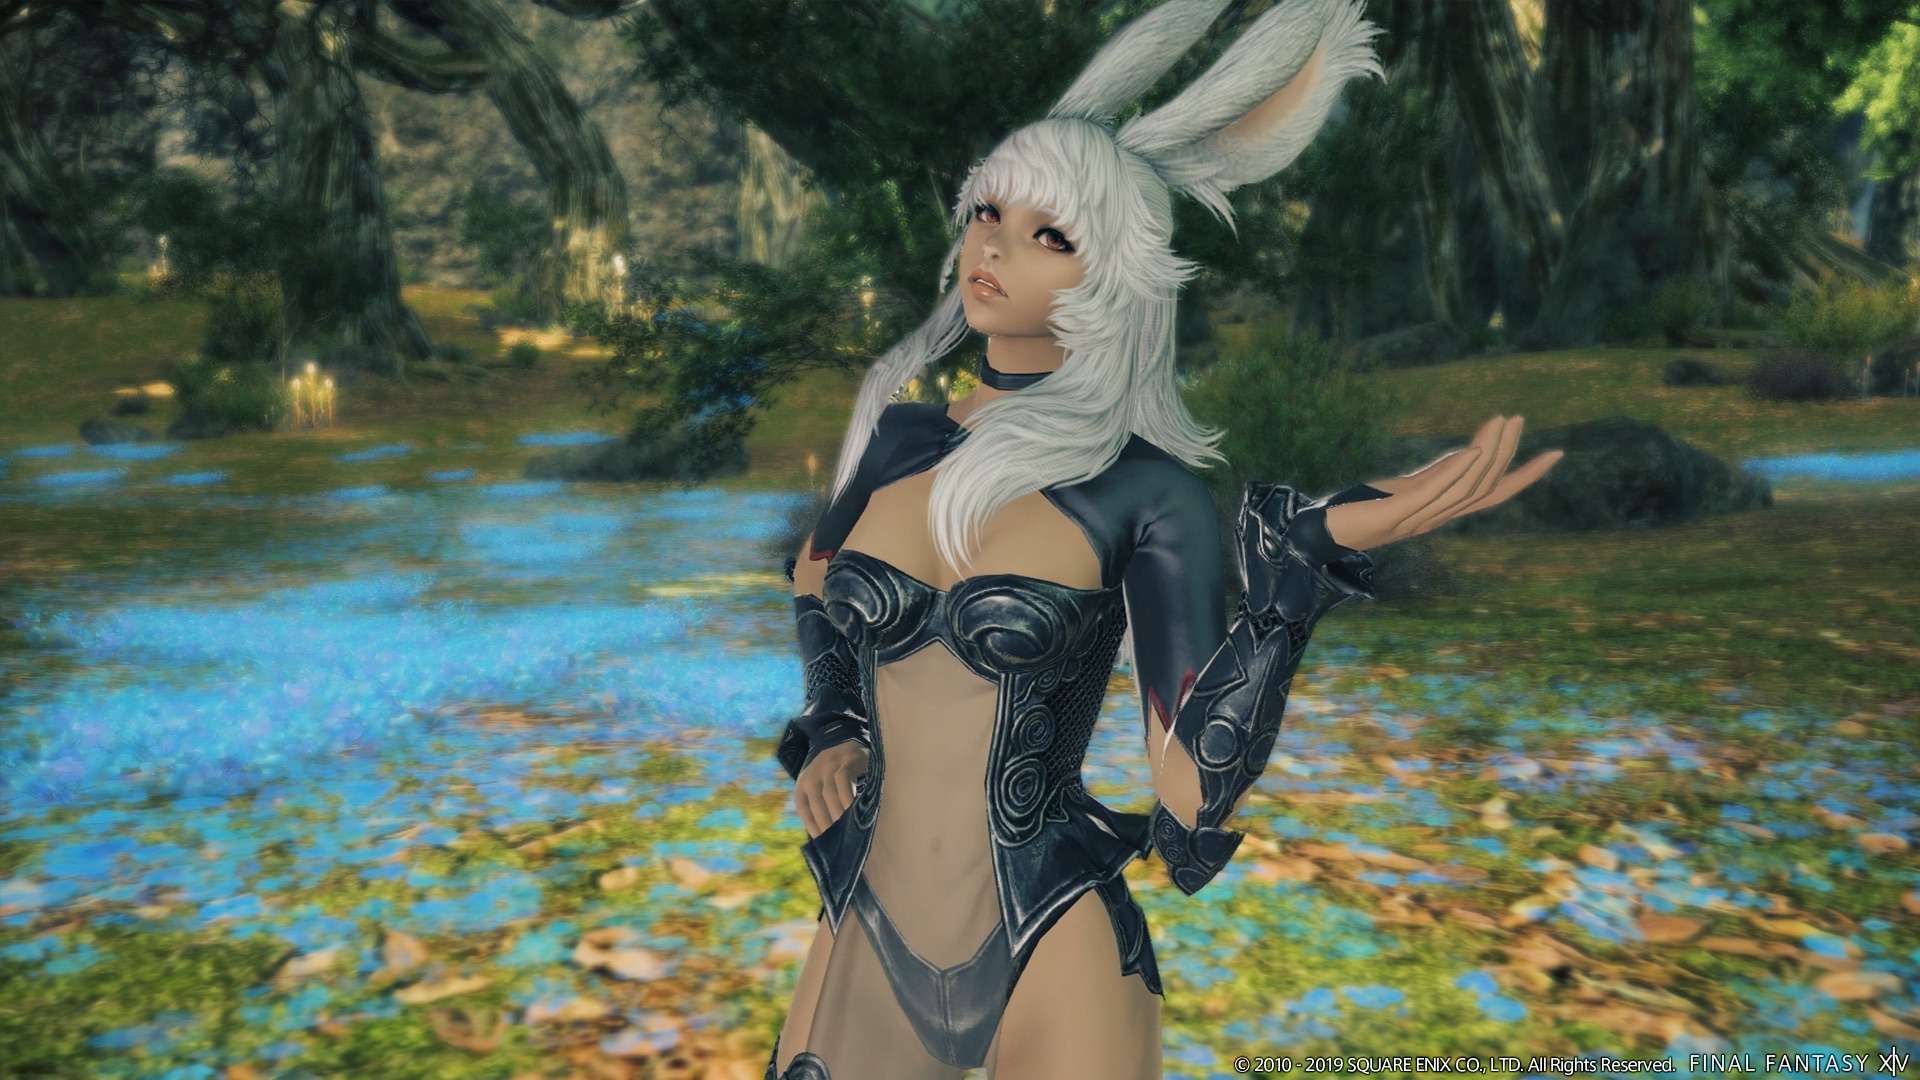 A look at the Viera in FINAL FANTASY XIV: Shadowbringers | Square Enix Blog